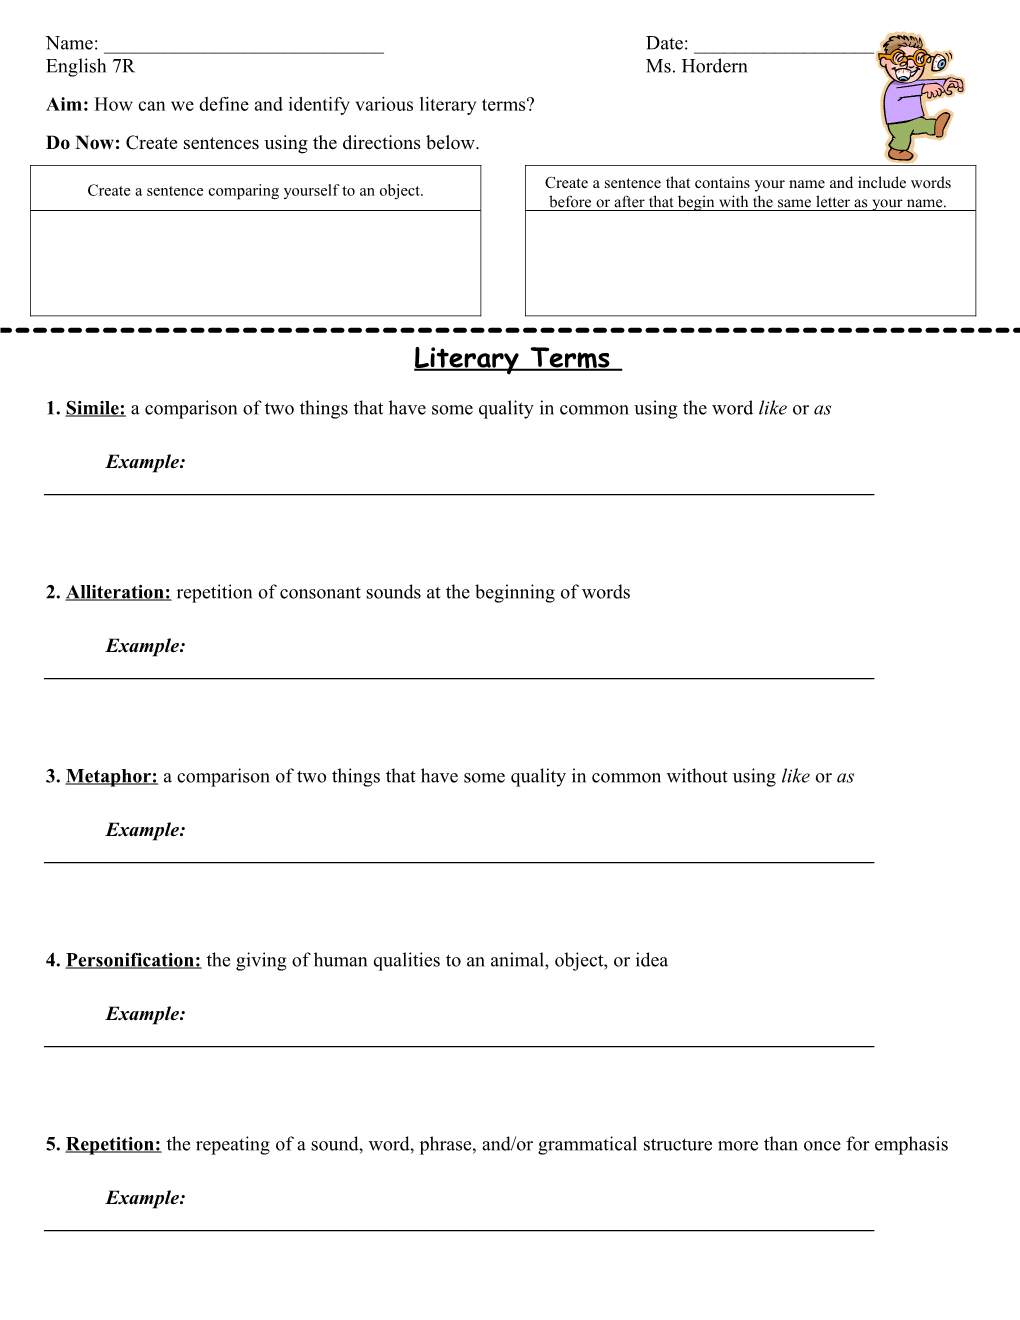 Aim: How Can We Define and Identify Various Literary Terms?